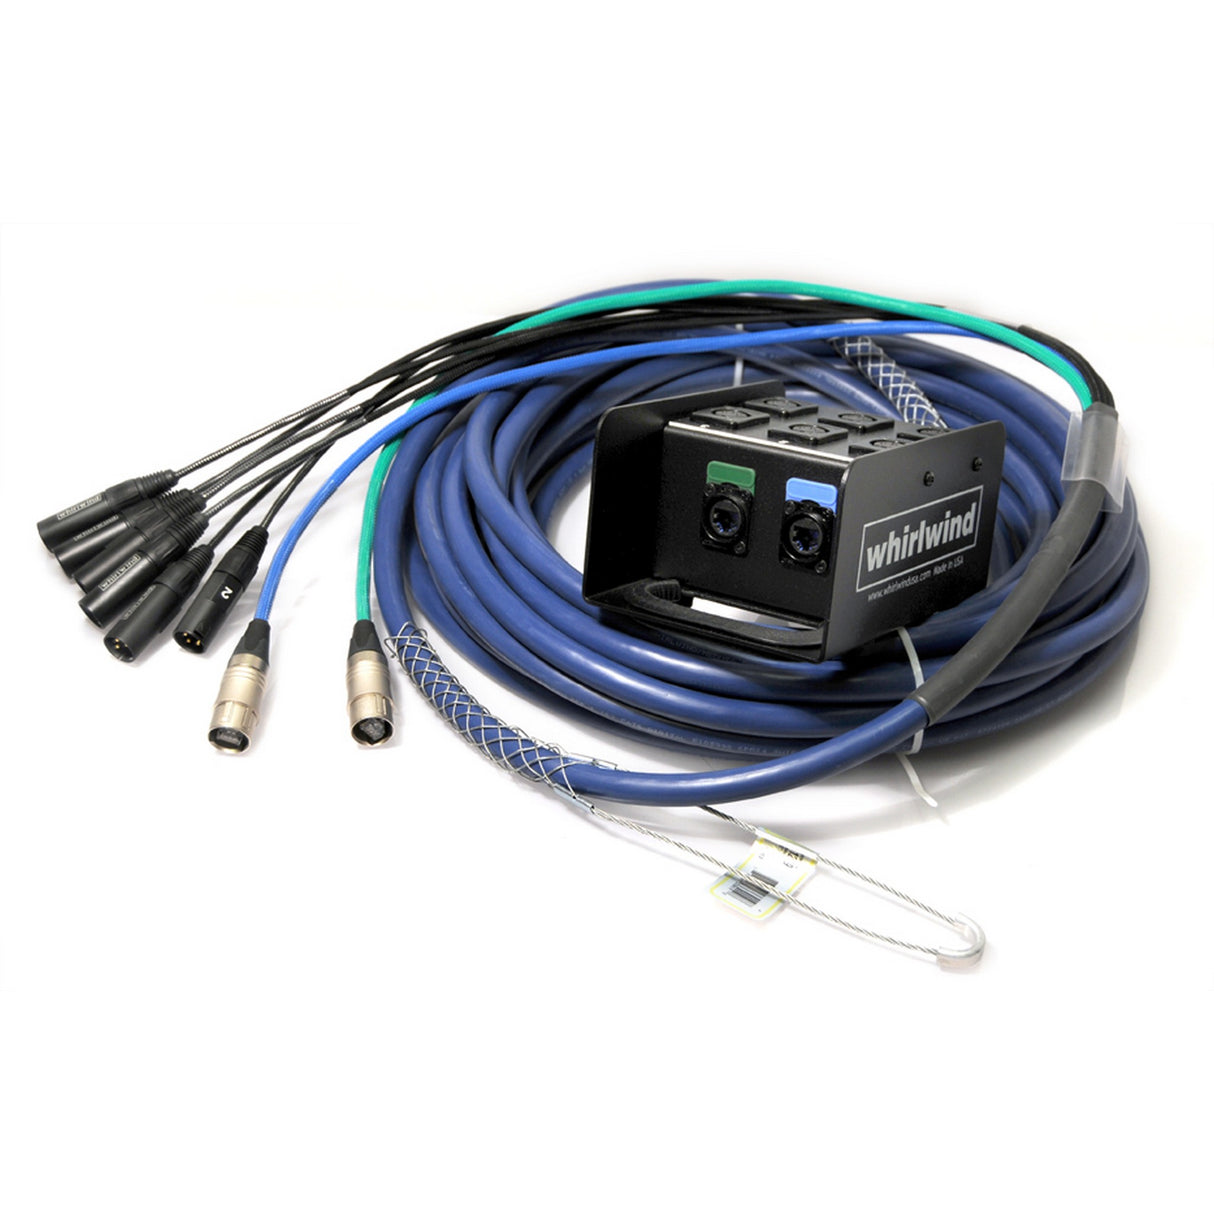 Whirlwind MD-6-2-C6-150 MEDUSA 6 XLR Inputs 2 CAT6 Lines with CAT5e Ethercon Snake Cable, 150-Feet